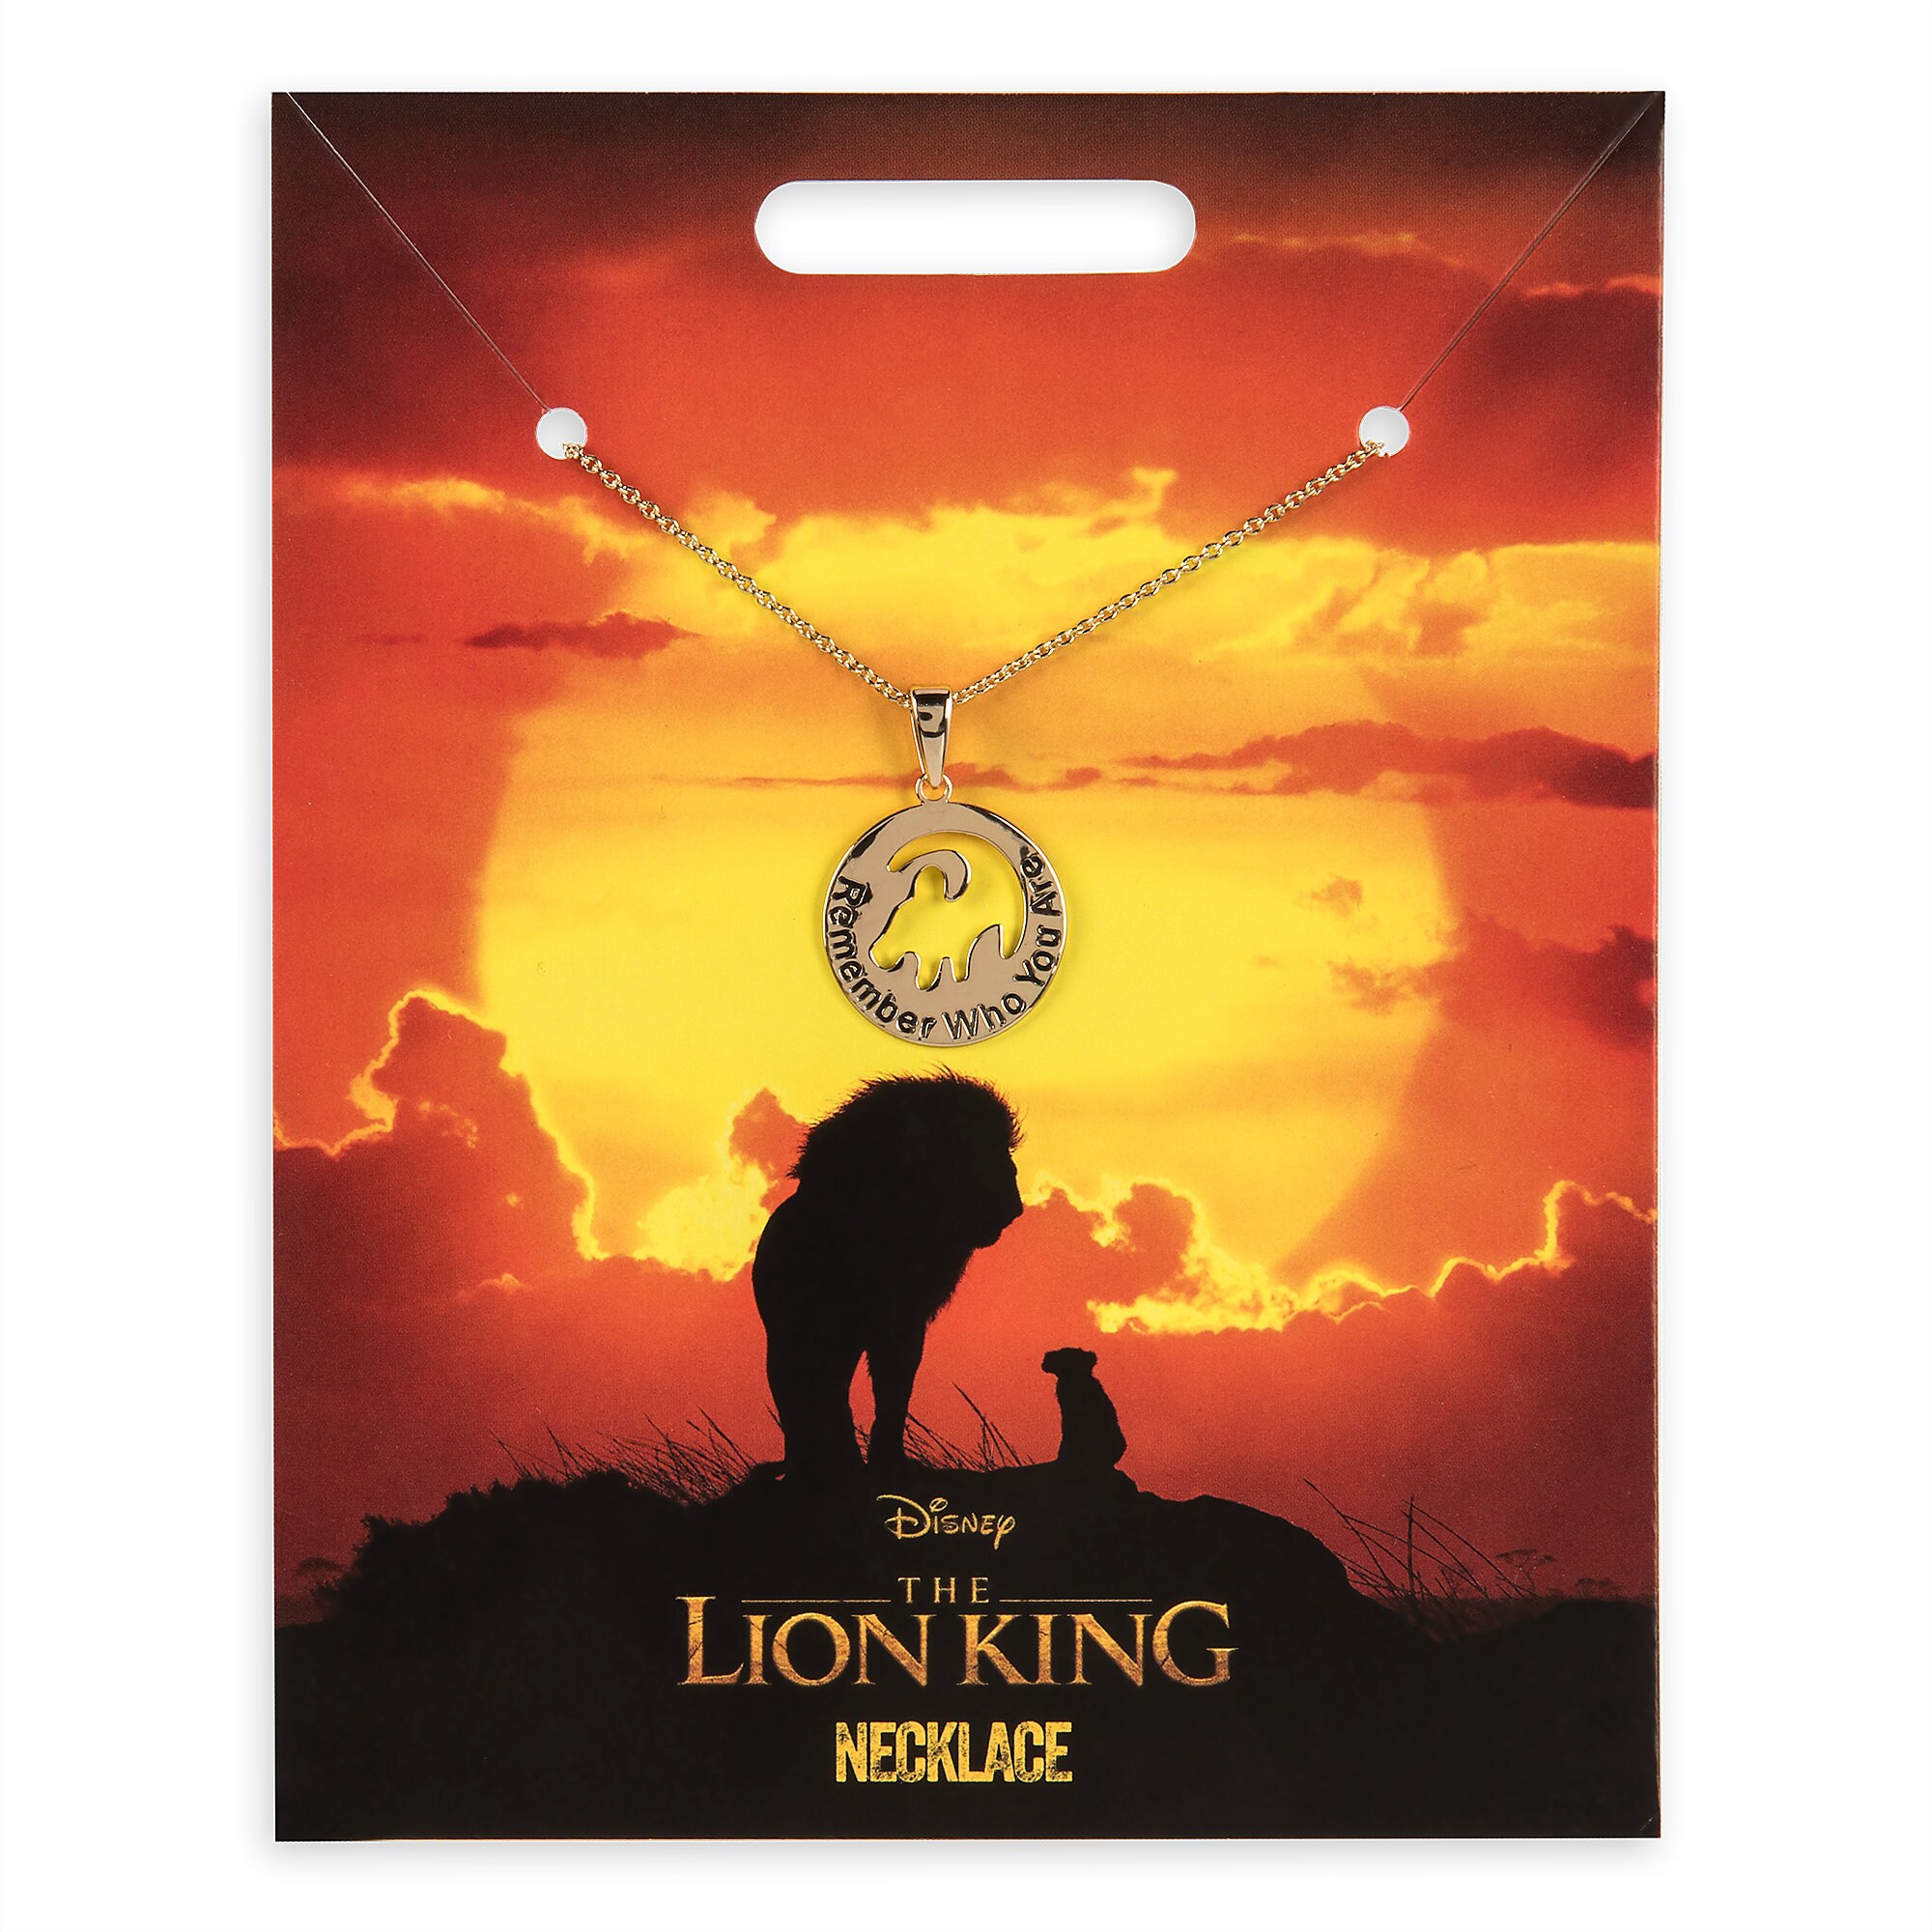 The Lion King Necklace - The Lion King 2019 Film